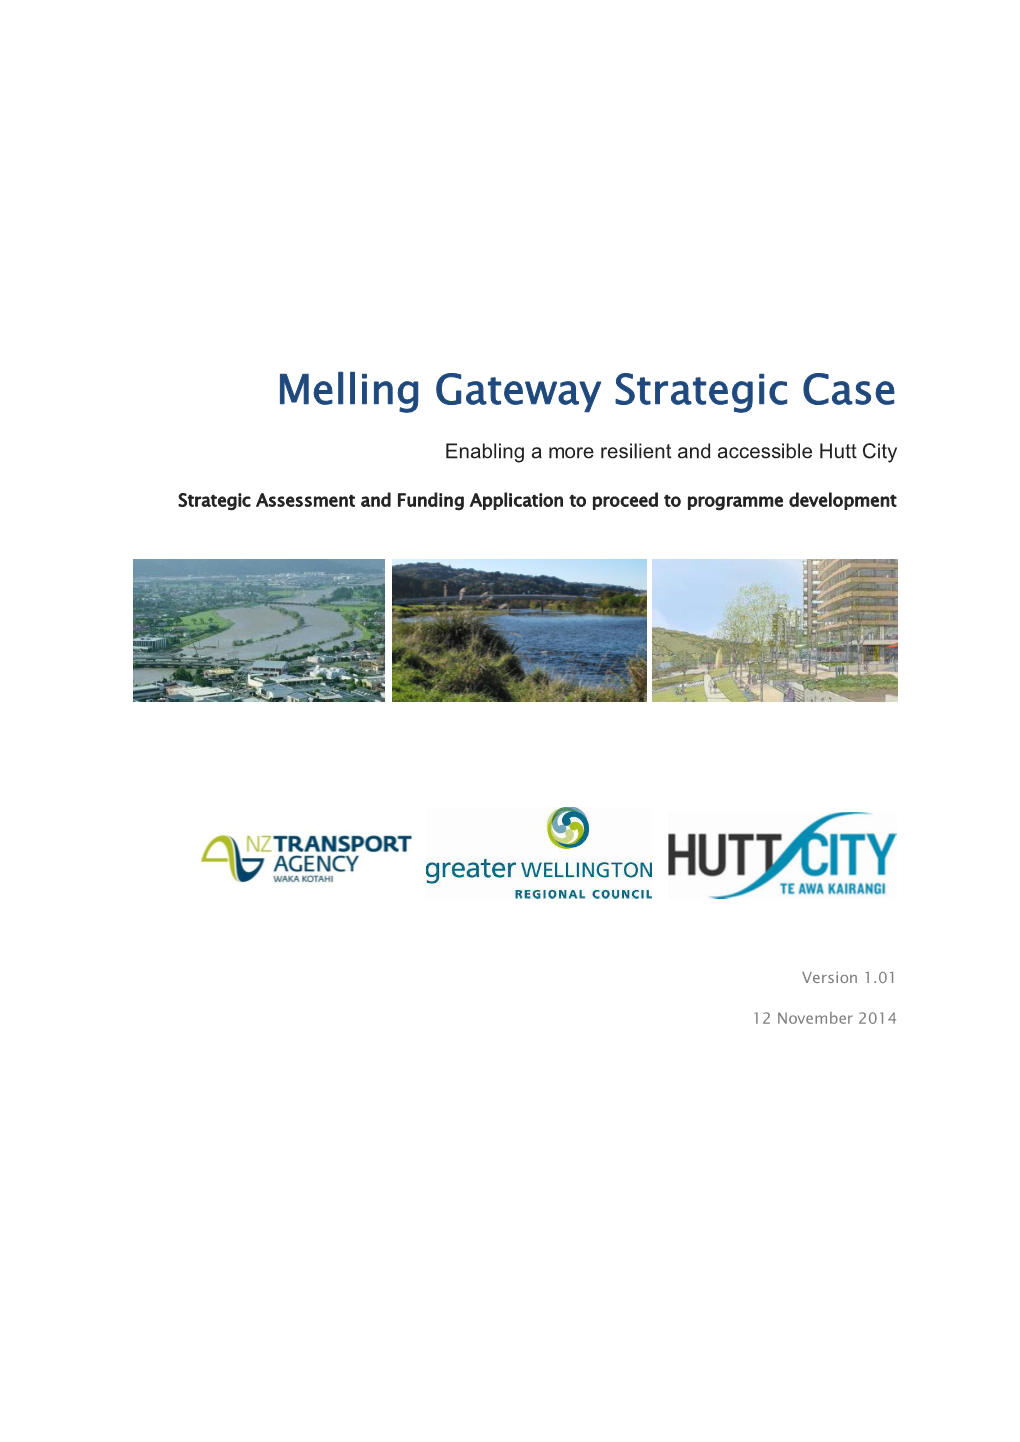 Melling Gateway Strategic Case Enabling a More Resilient and Accessible Hutt City